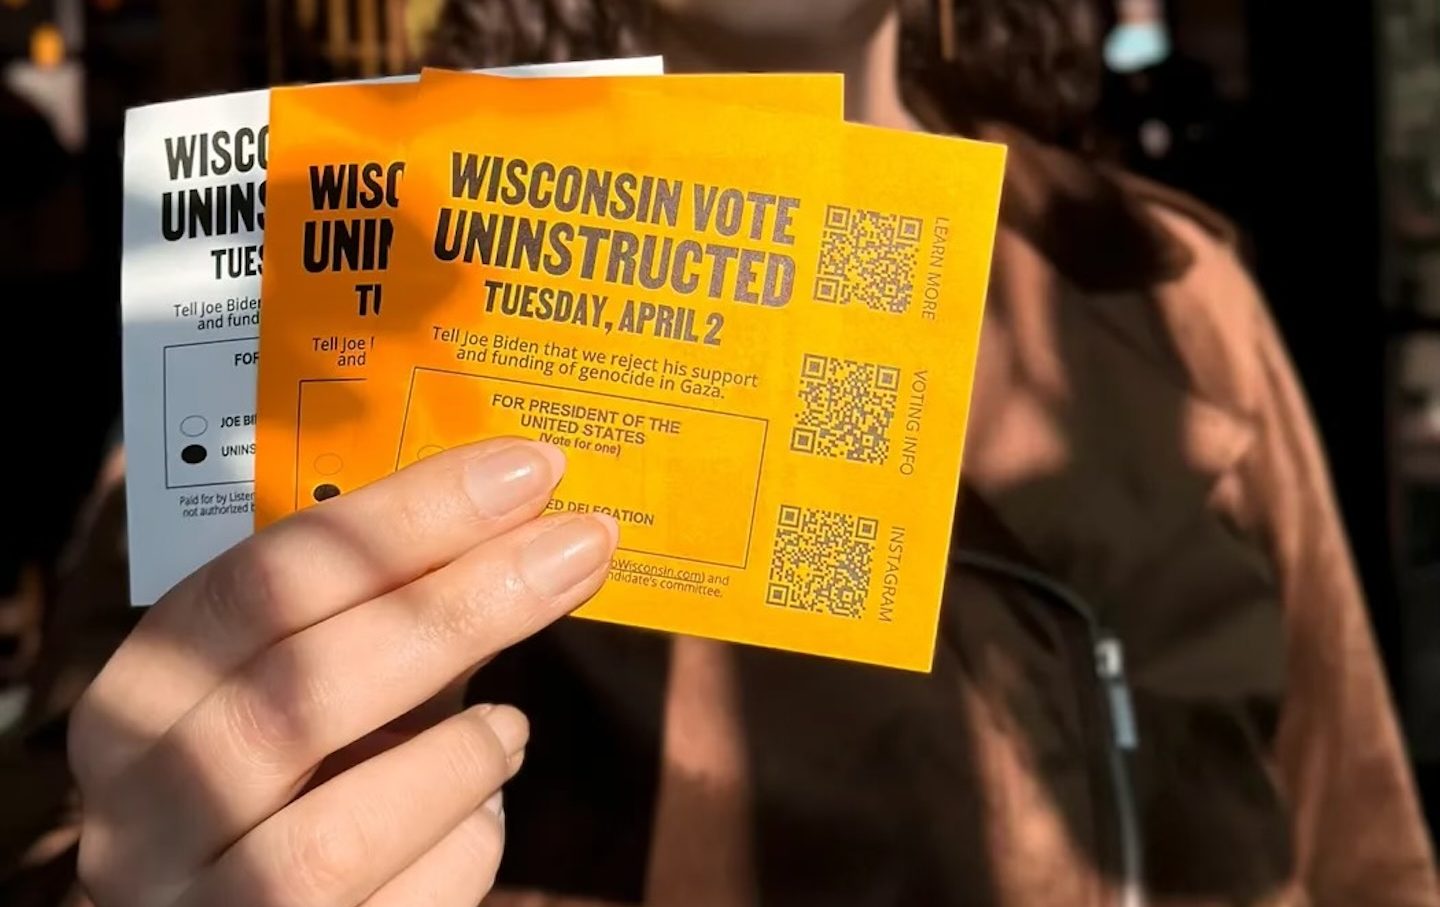 An image from the "Listen to Wisconsin" campaign.